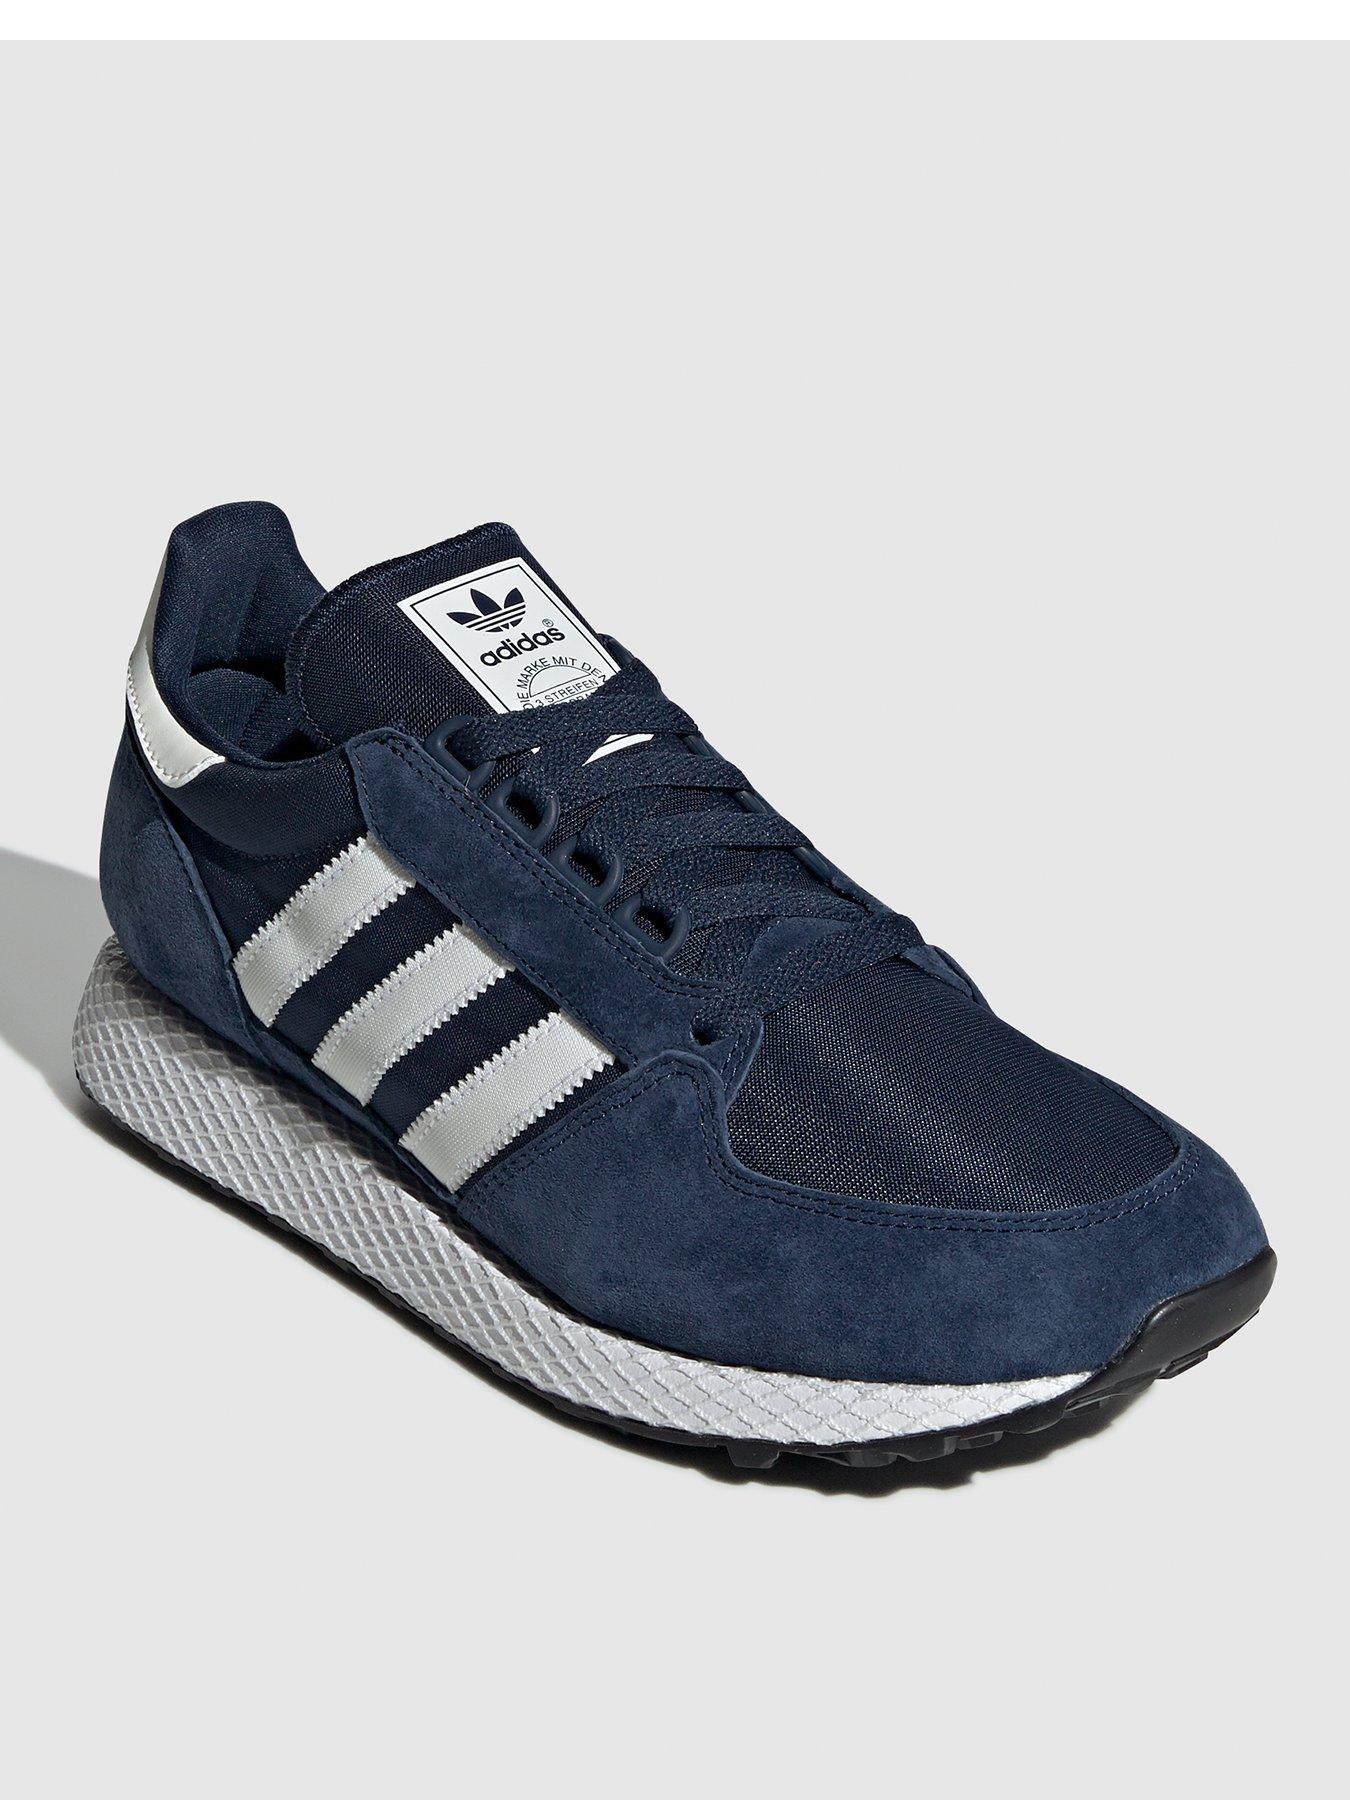 men's forest grove adidas